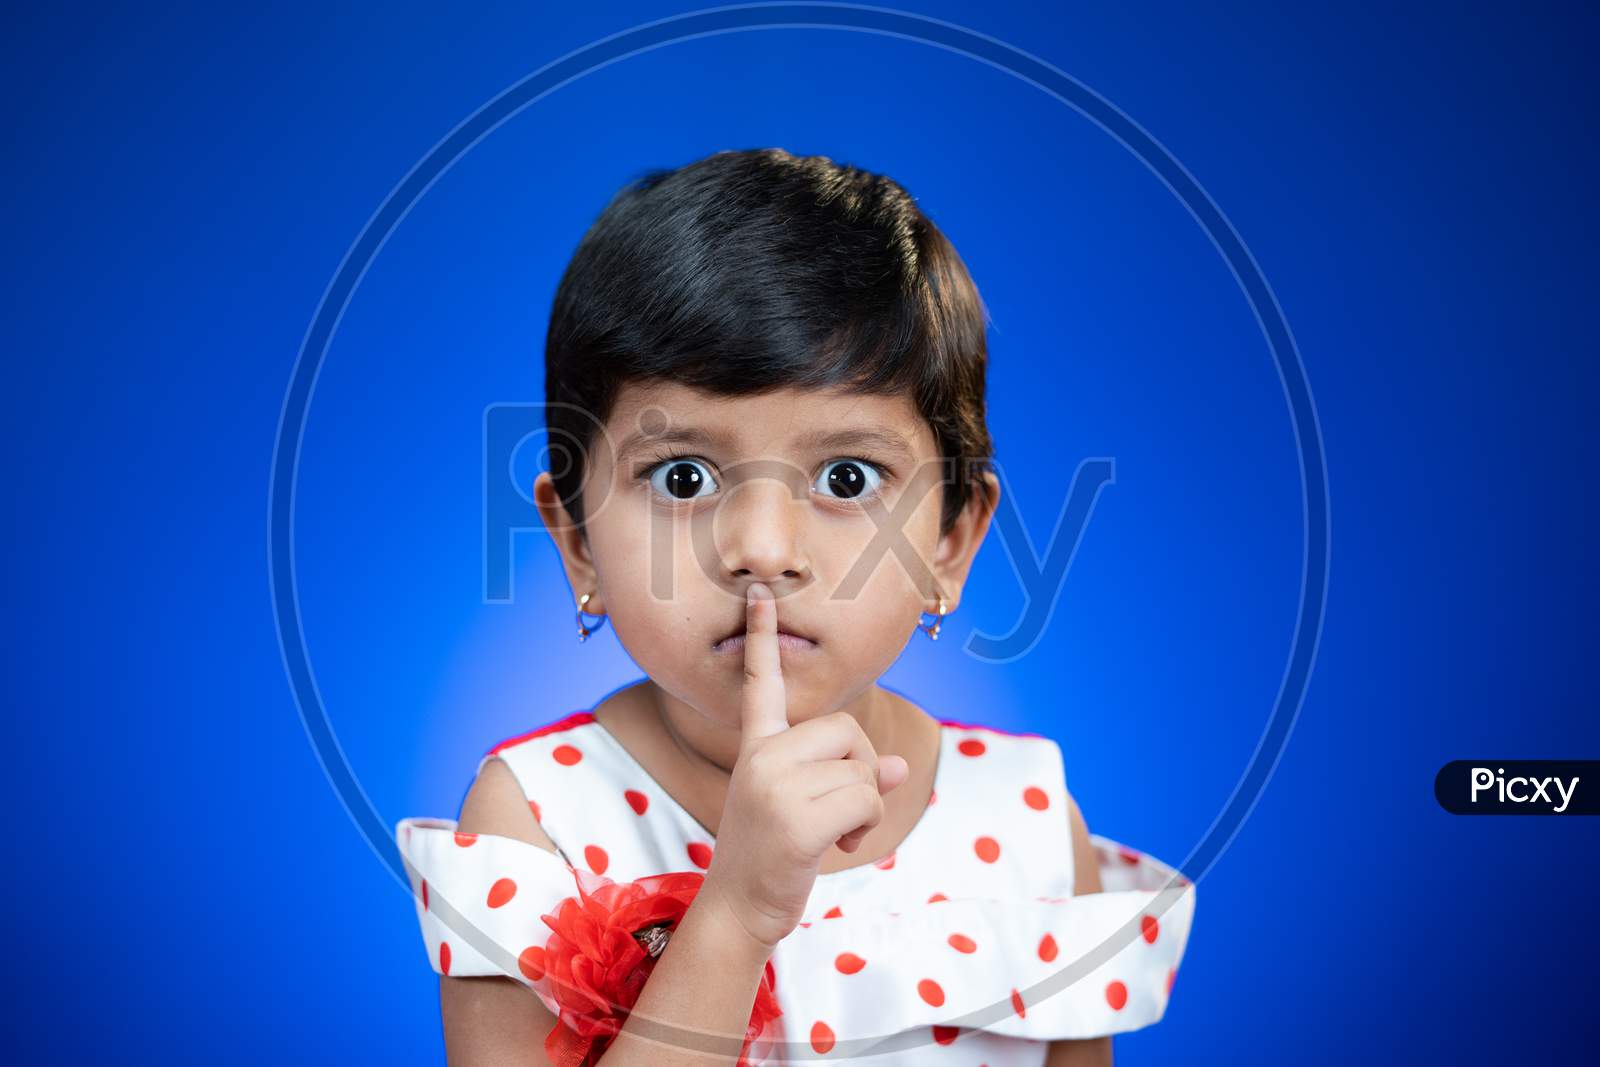 Cute Girl Kid Saying Keep Silence Quite By Placing Finger On Mouth On Blue Studio Background By Looking At Camera.